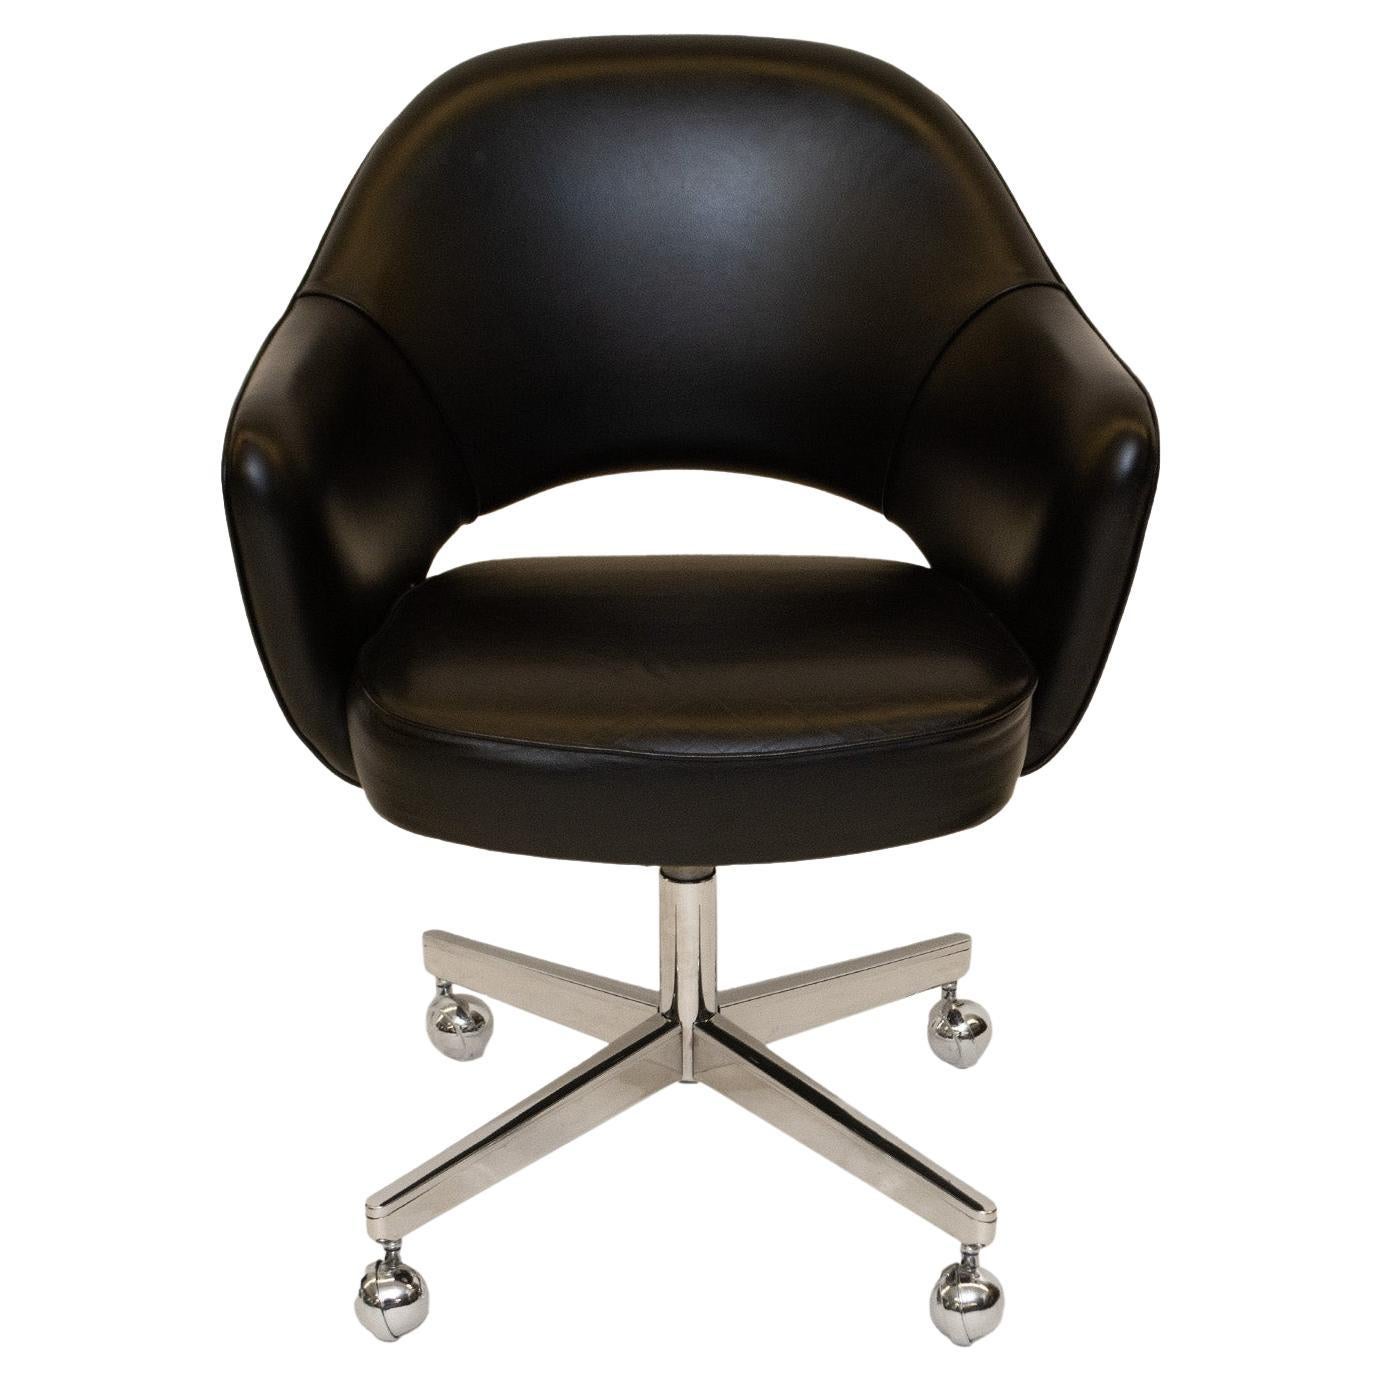 This gorgeous vintage Knoll Saarinen Executive Armchair comes in its original supple black leather in very good condition. There is very minor wear. This particular chair has been installed, with a vintage swivel base, newly plated in nickel to